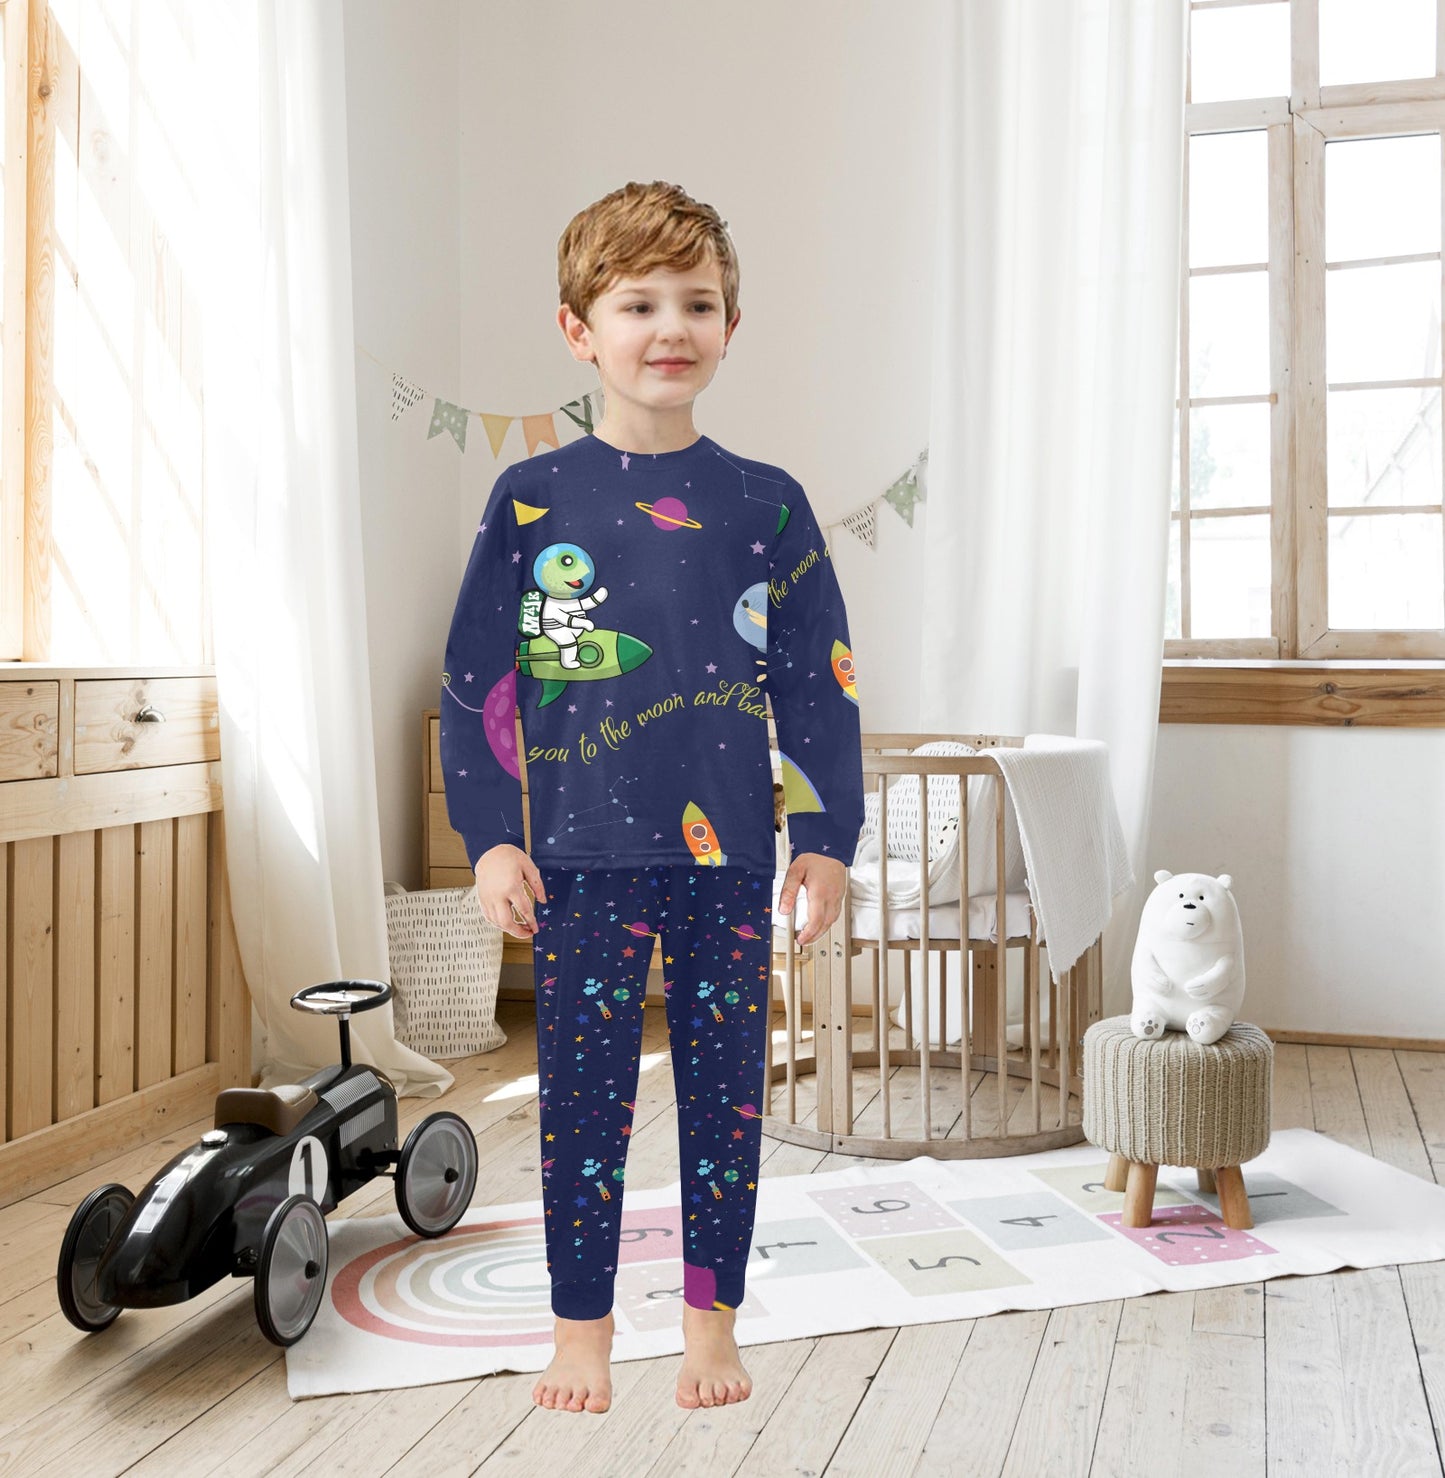 Little Boys' Crew Neck Long Pajama Set "Love You to the Moon & Back"